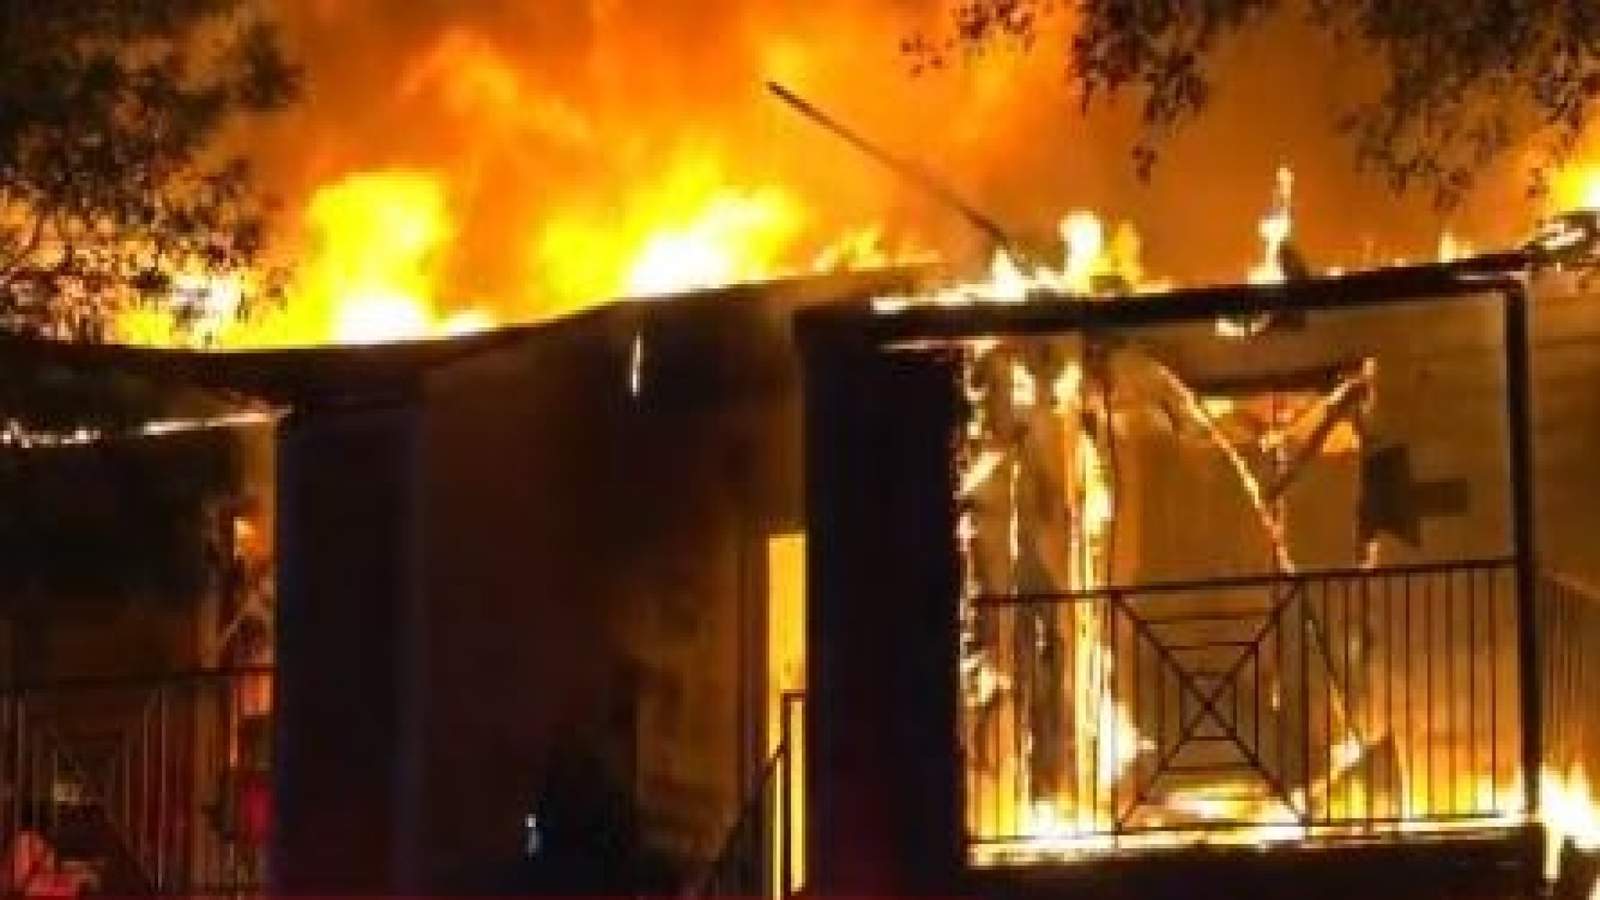 Firefighter and resident injured as blaze spreads through N. Harris County apartment complex: Officials